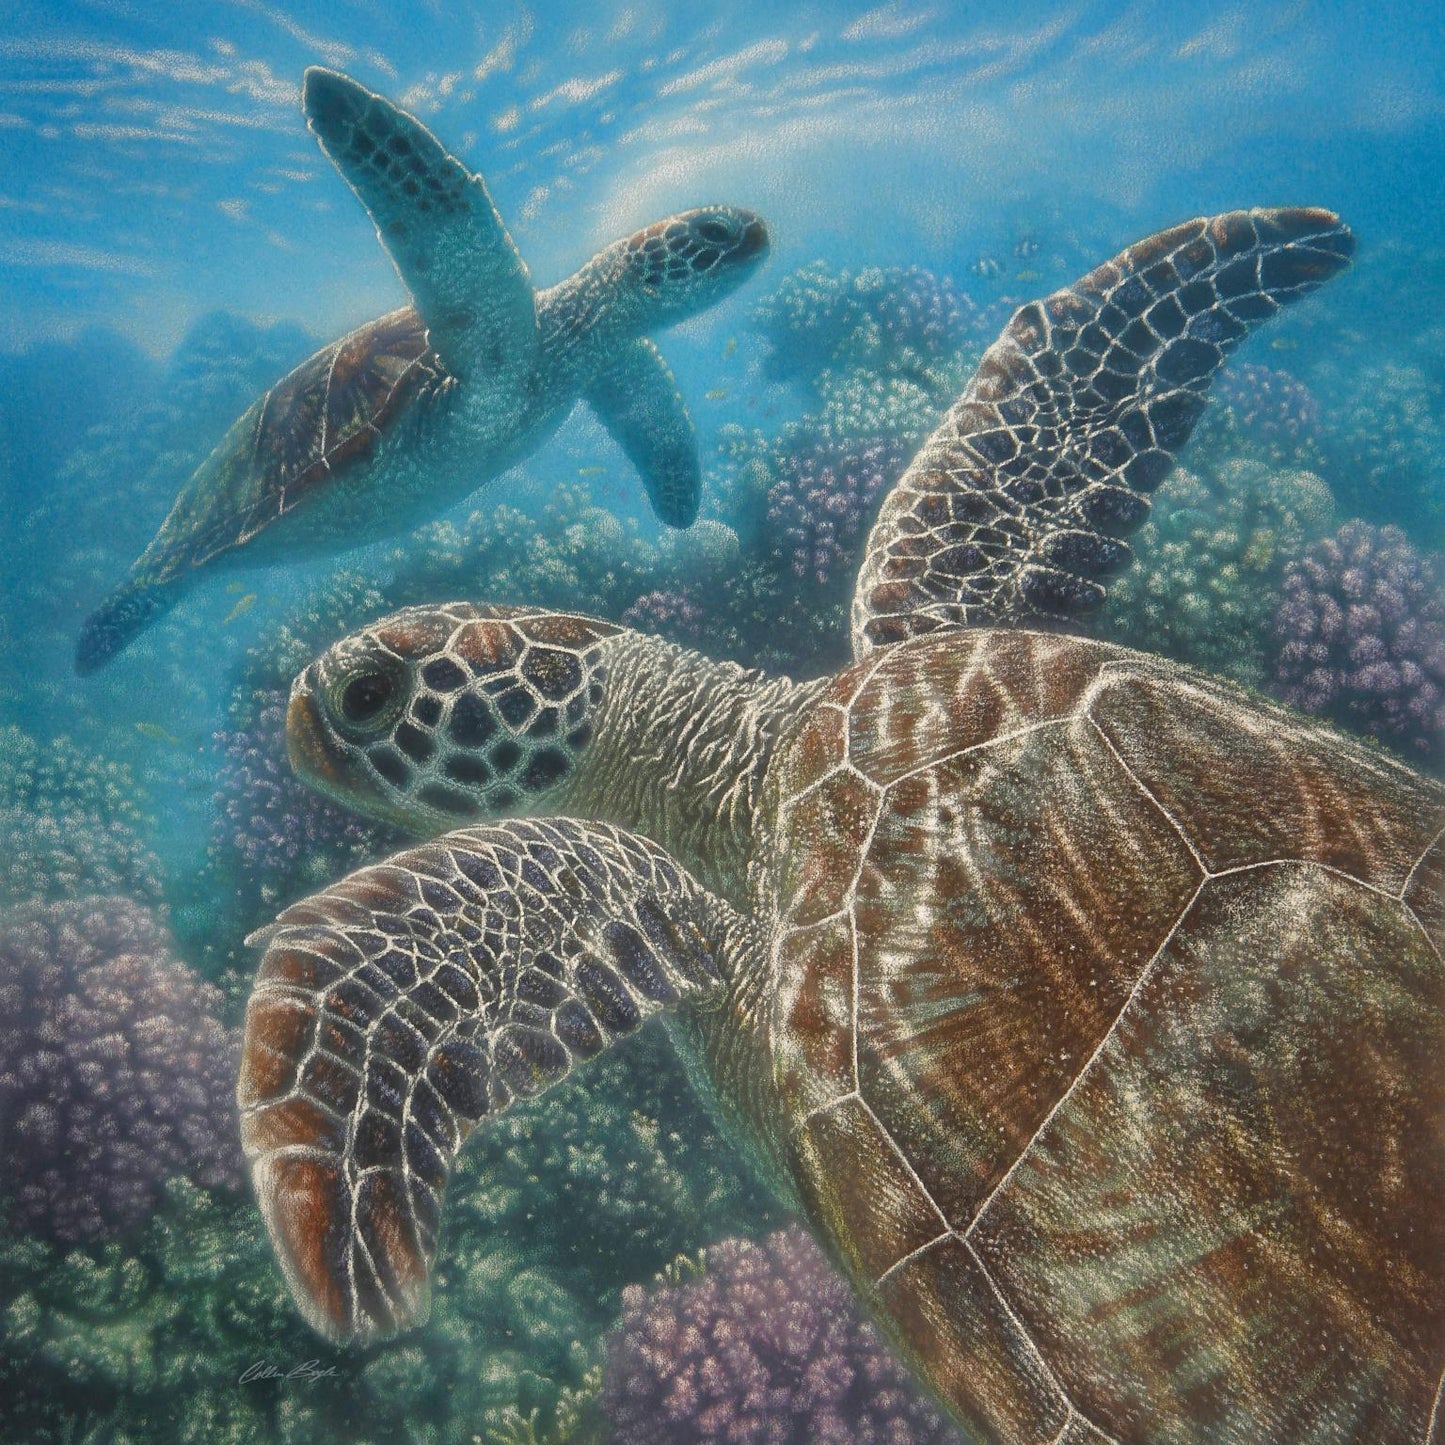 Framed Small - Sea Turtles By Collin Bogle - Blue